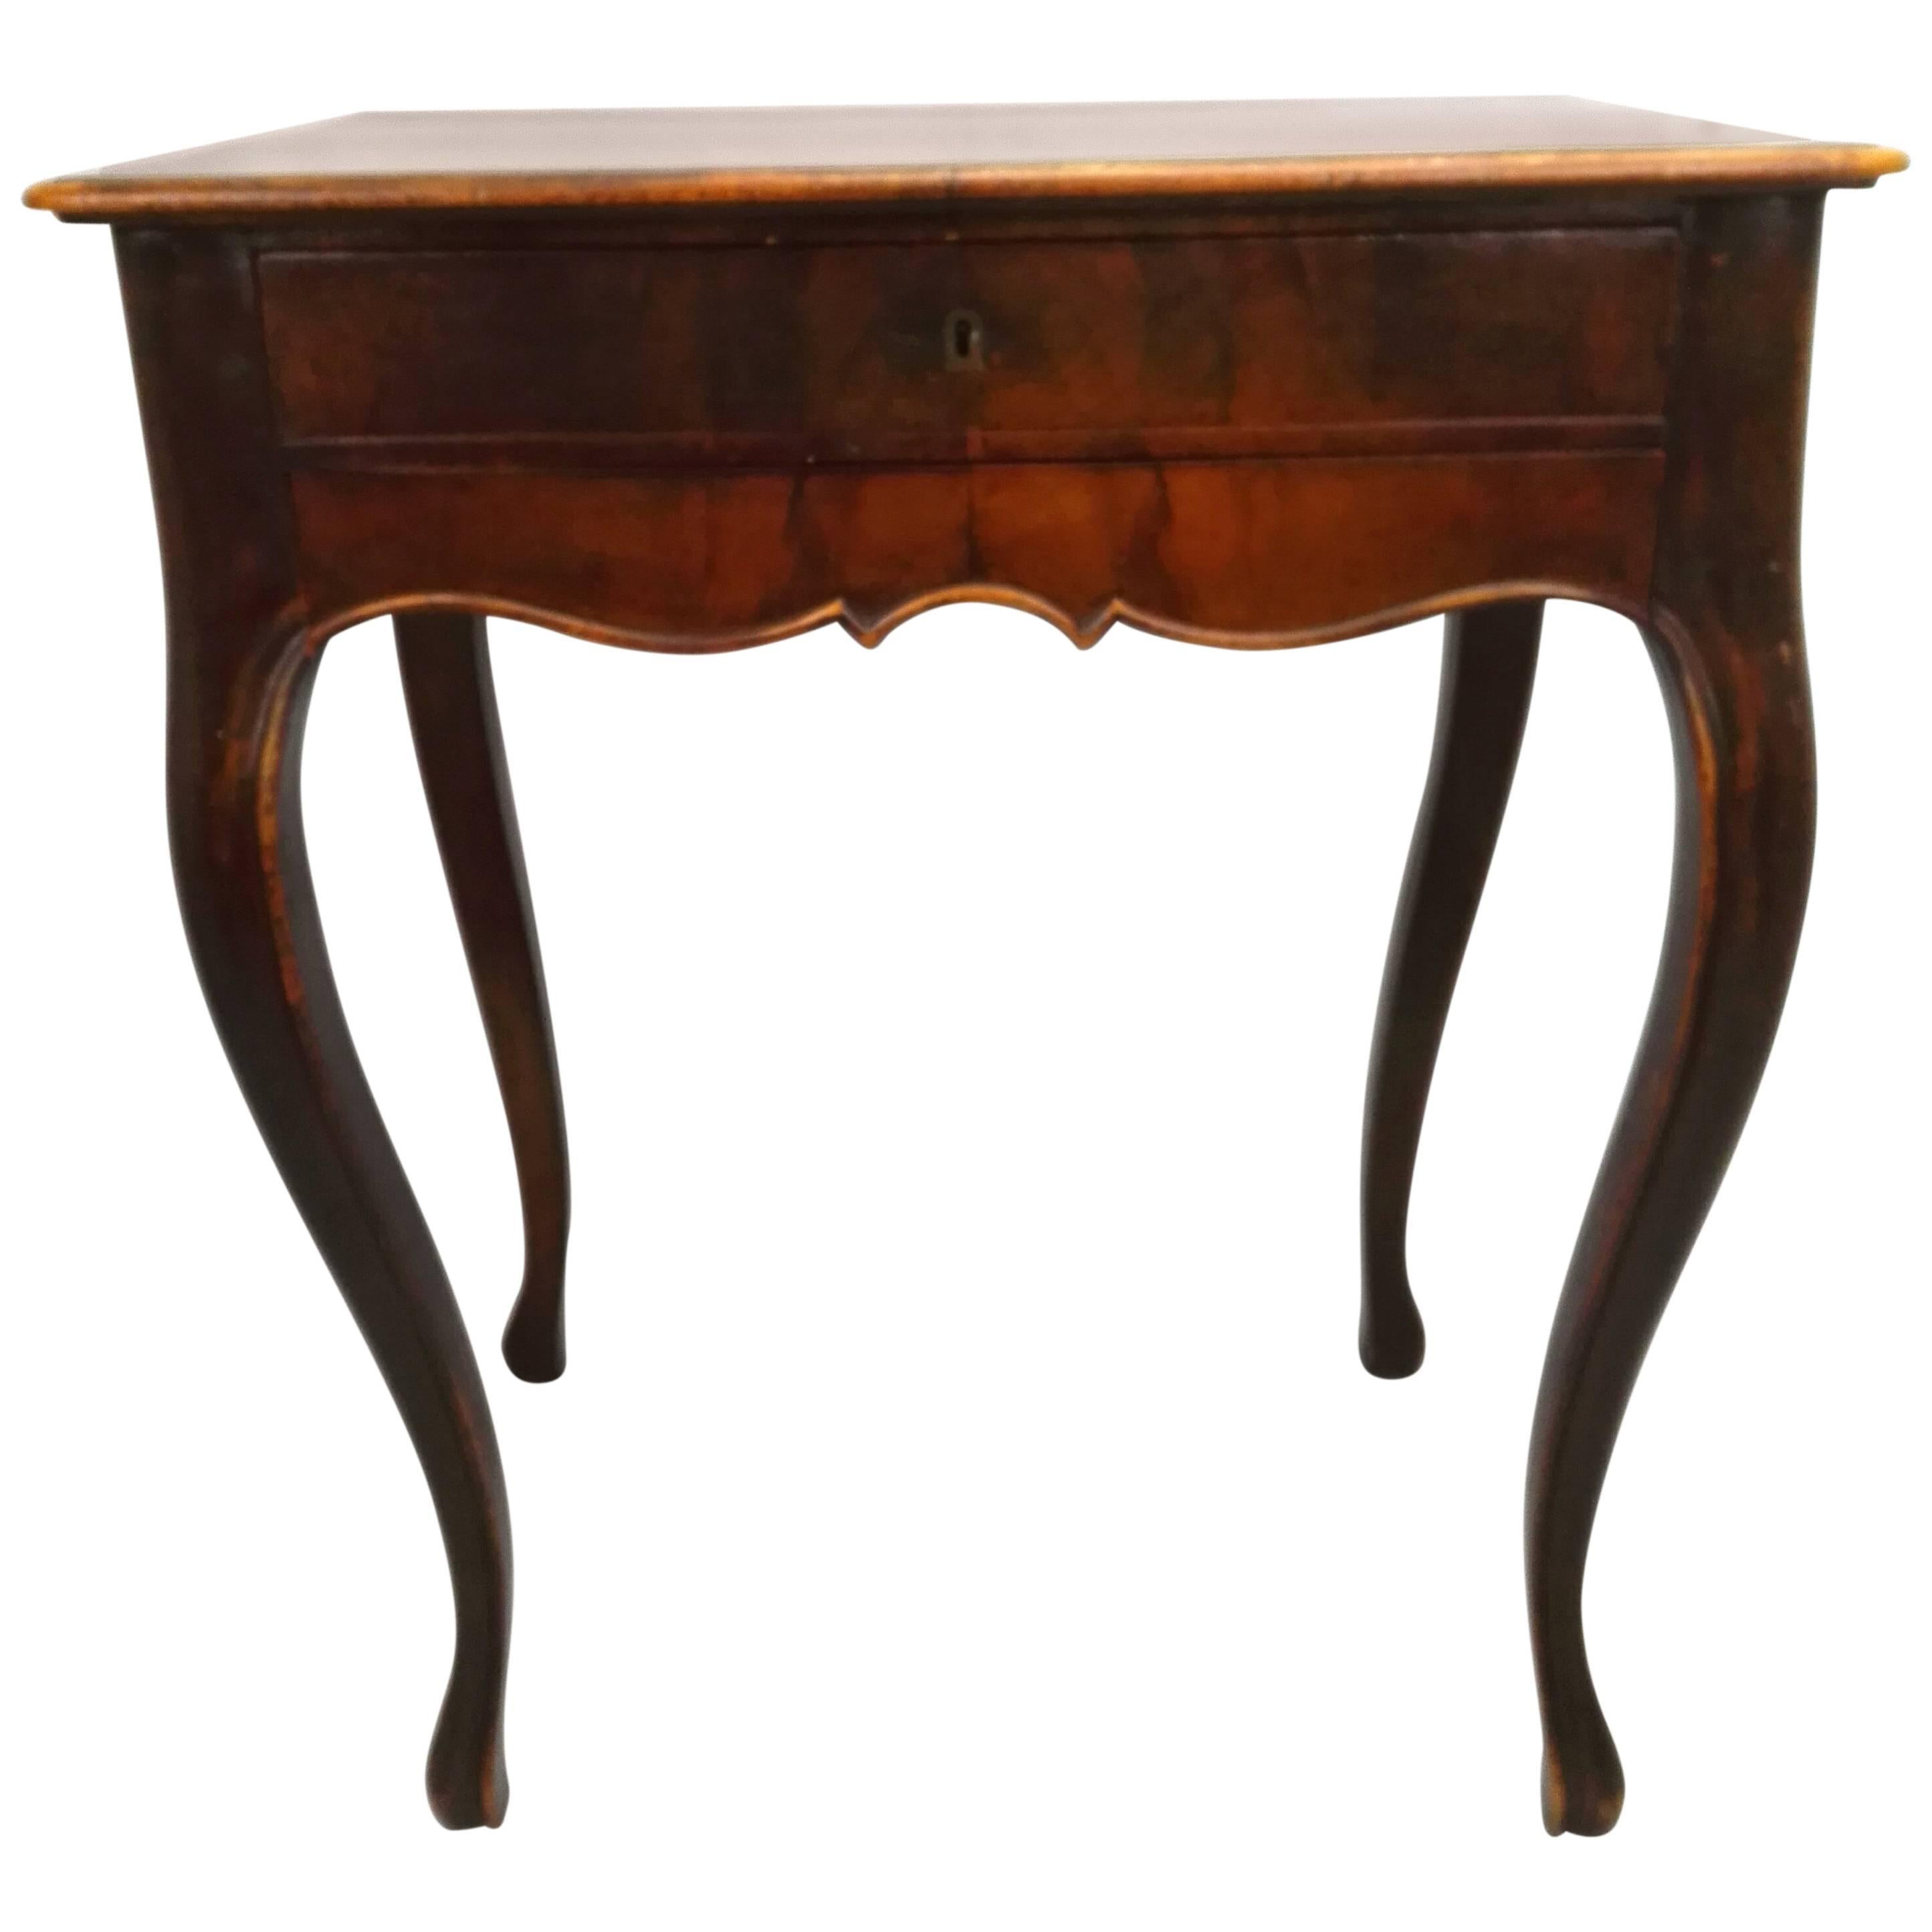 19th Century Rococo Mahogany Curved Legs Side End Table Good Original Condition For Sale